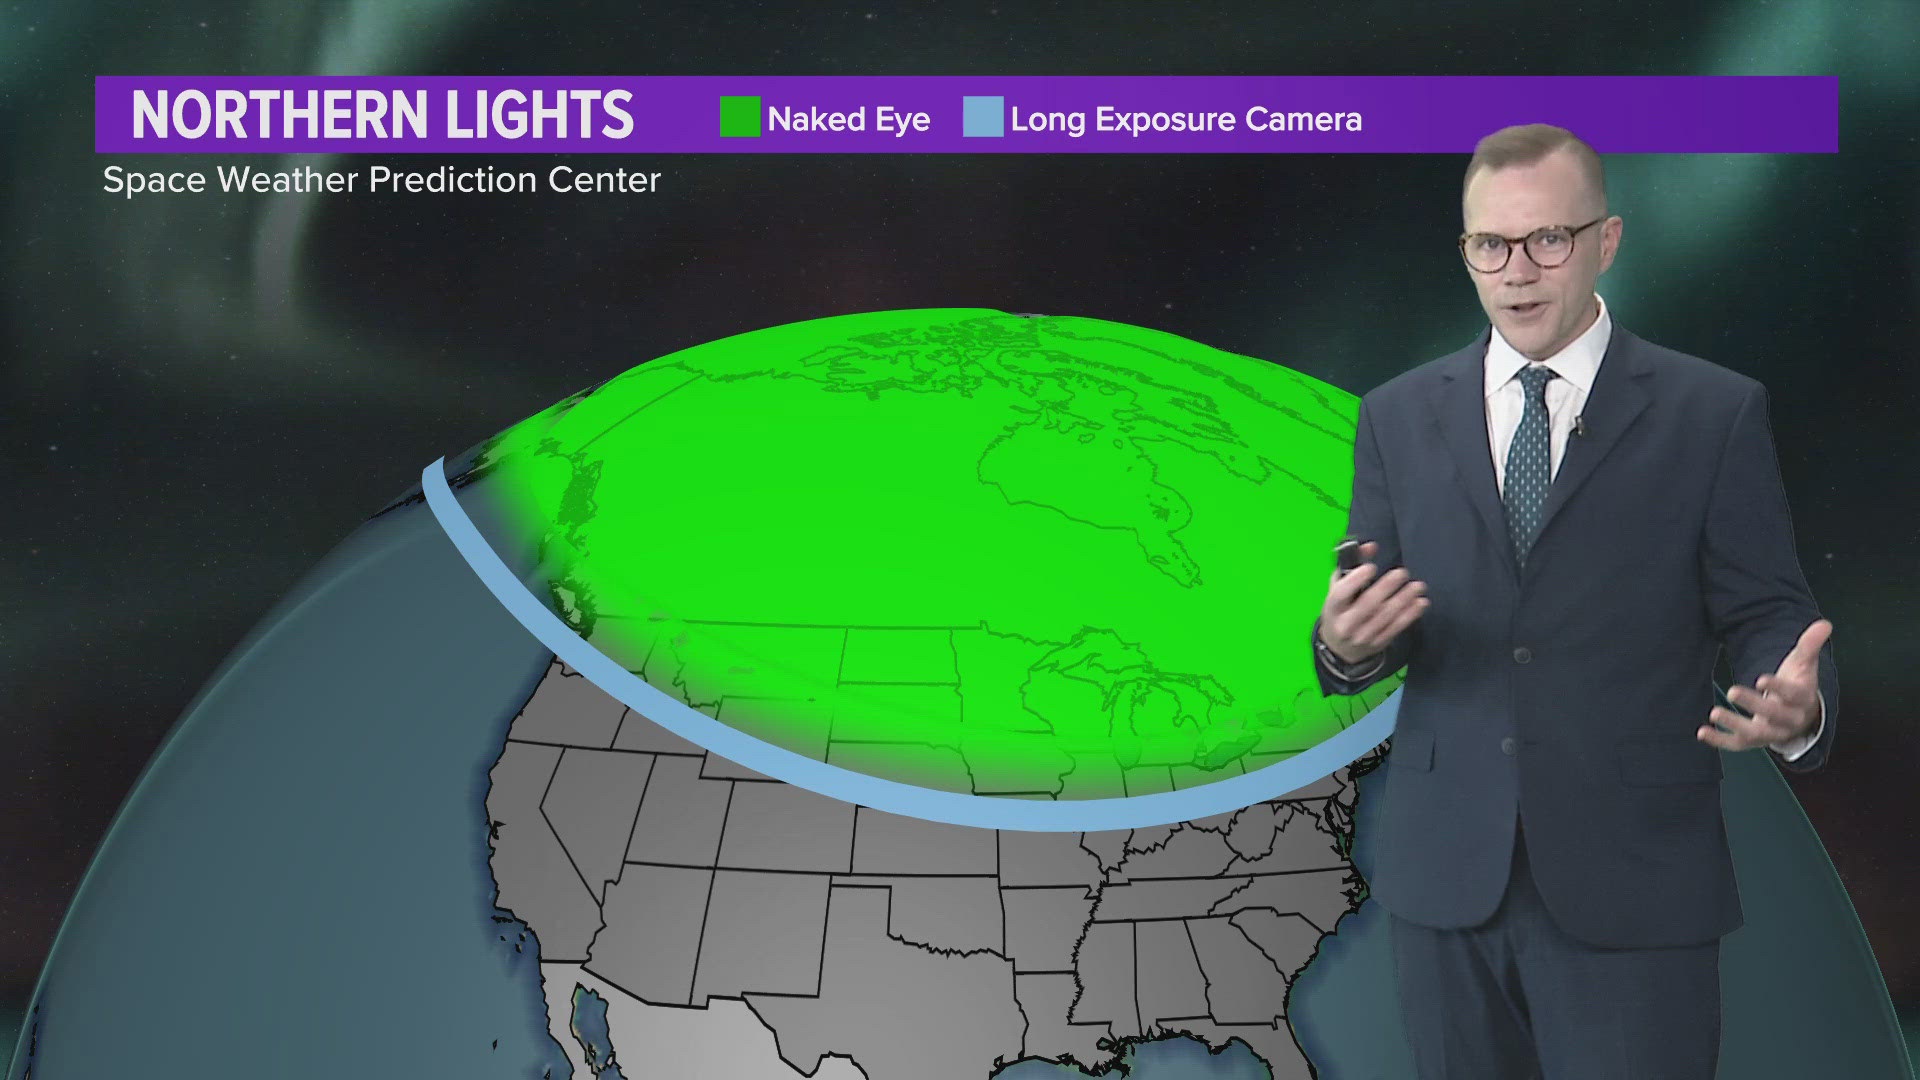 A strong solar storm may result in the Northern Lights being seen further south than normal.